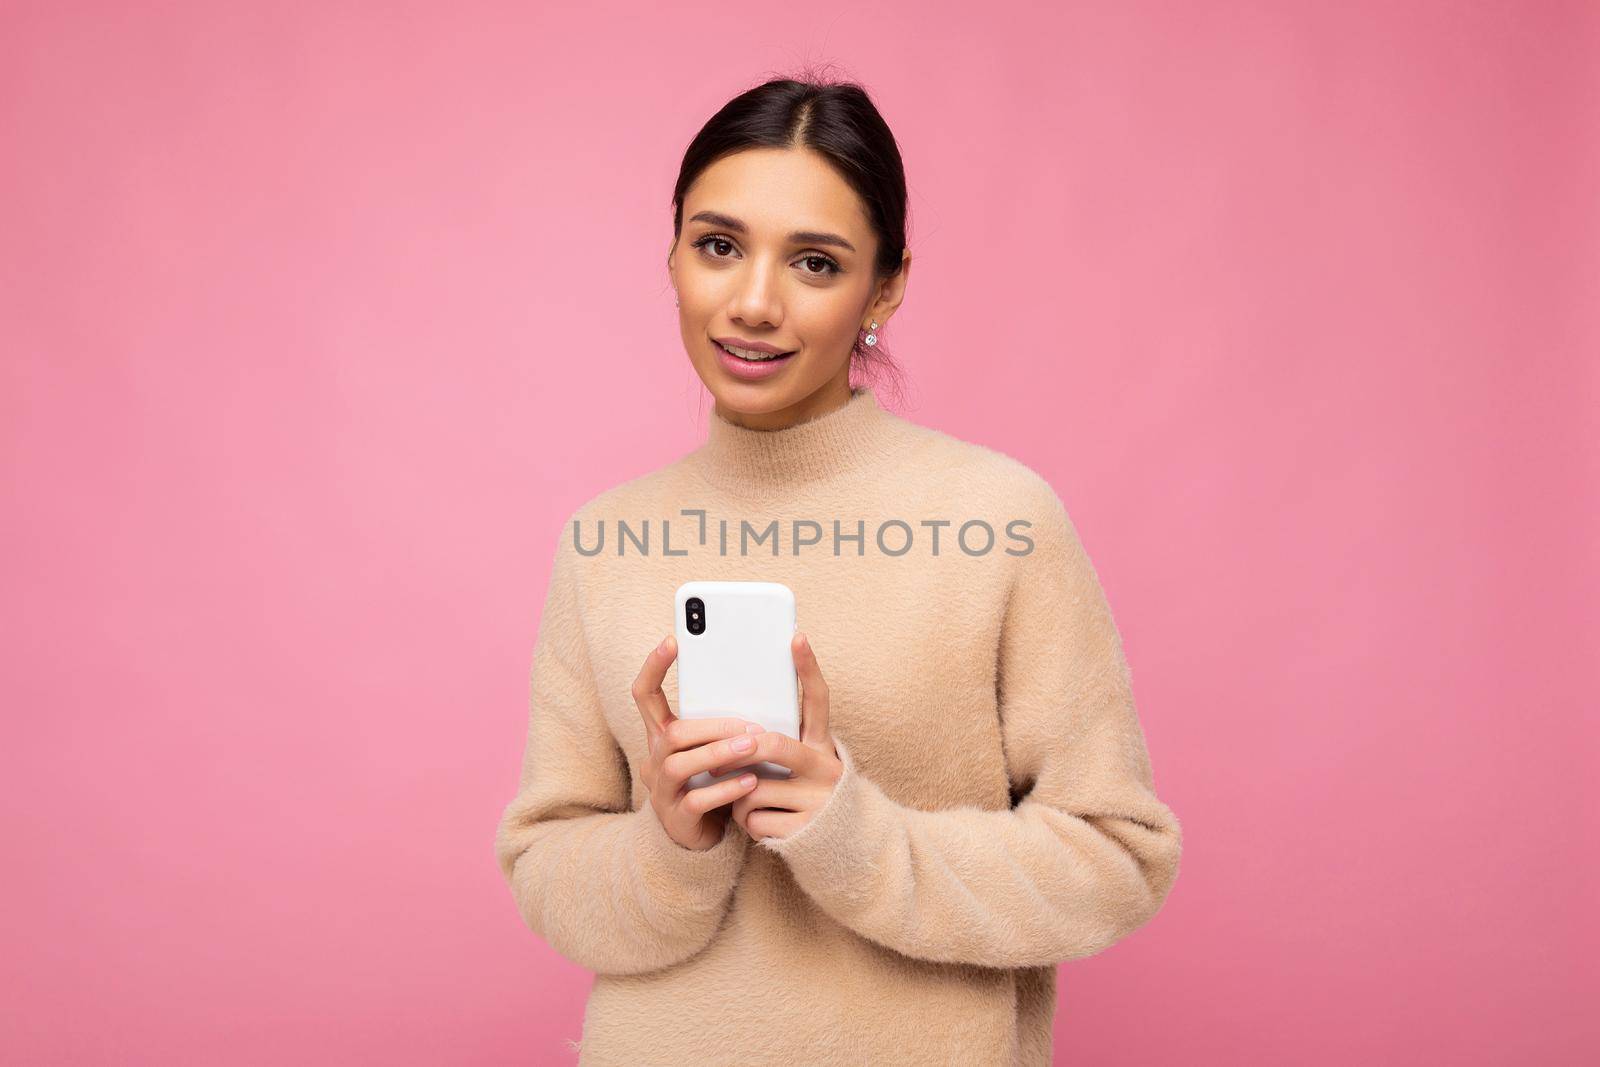 Attractive cute young brunet woman wearing beige warm sweater standing isolated over pink background surfing on the internet via phone looking at camera.